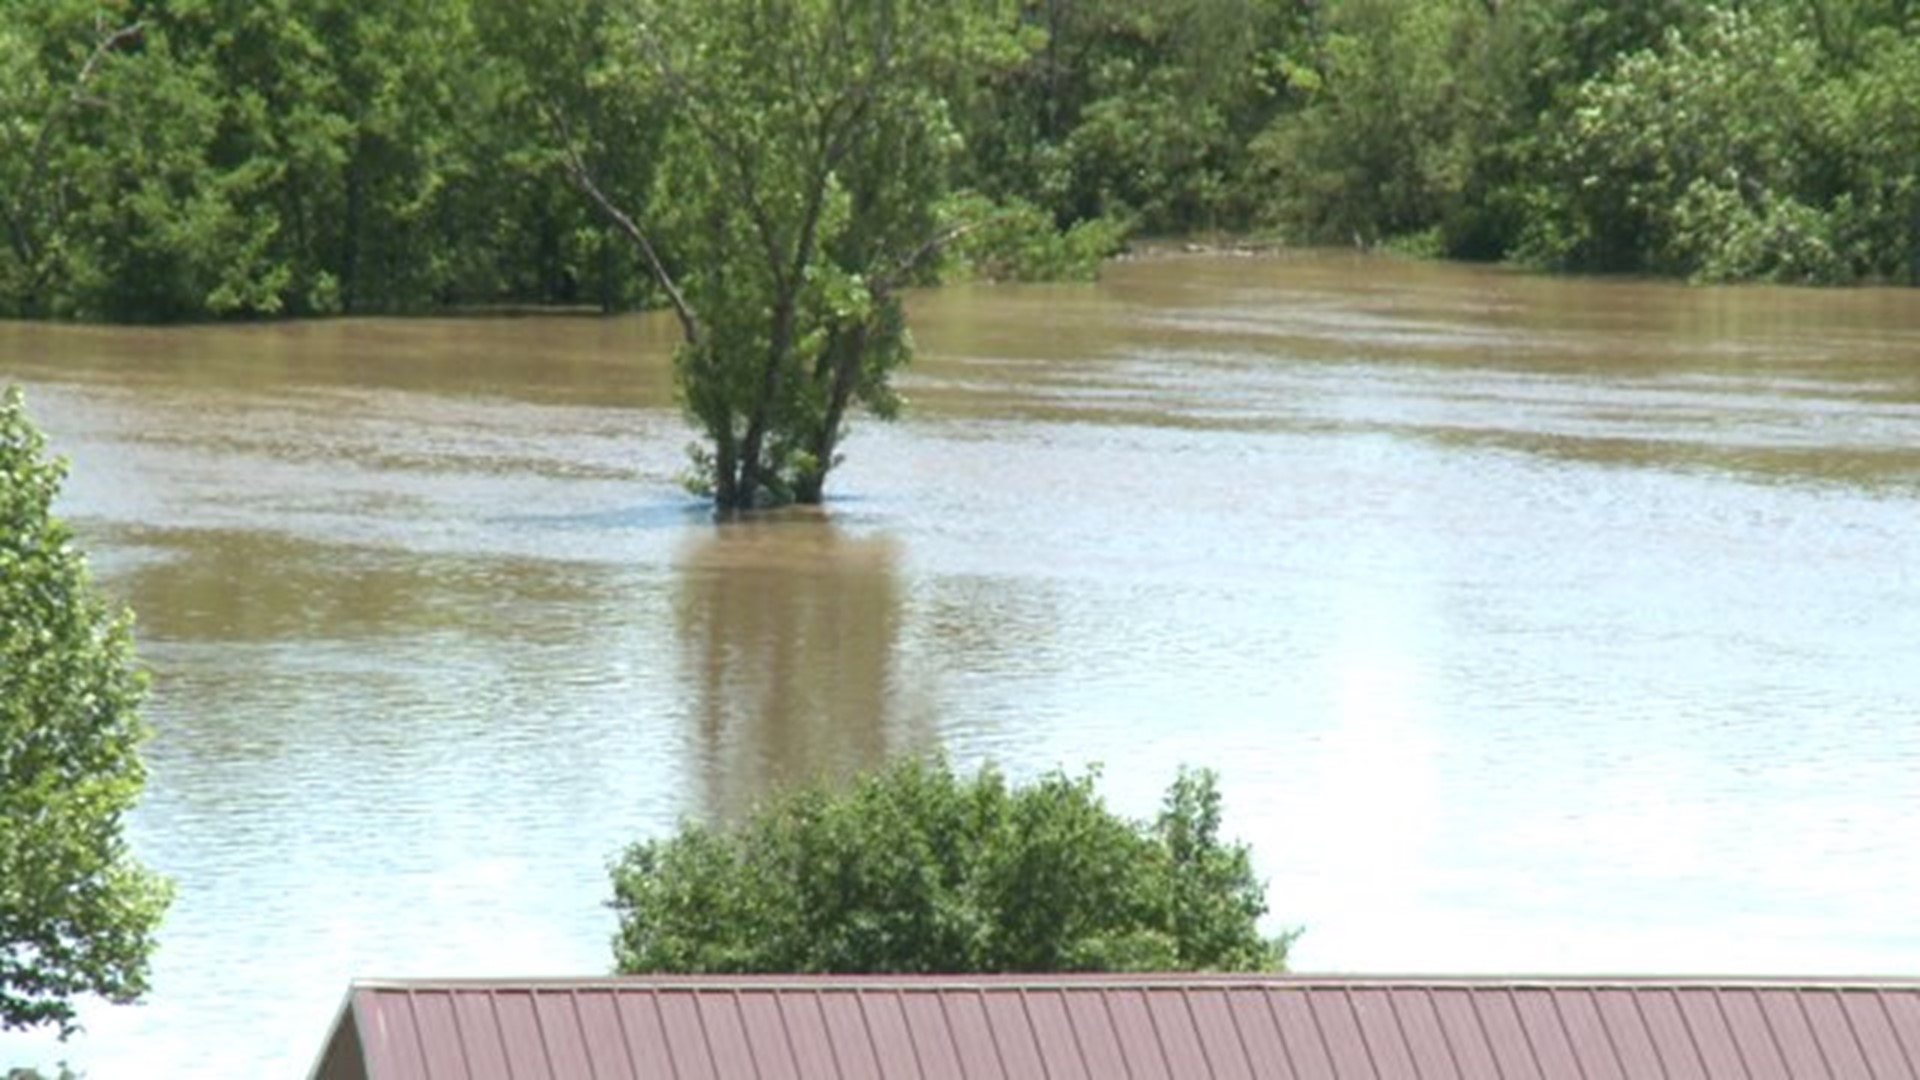 LeFlore County Authorities Search For Spiro Man After Flooding